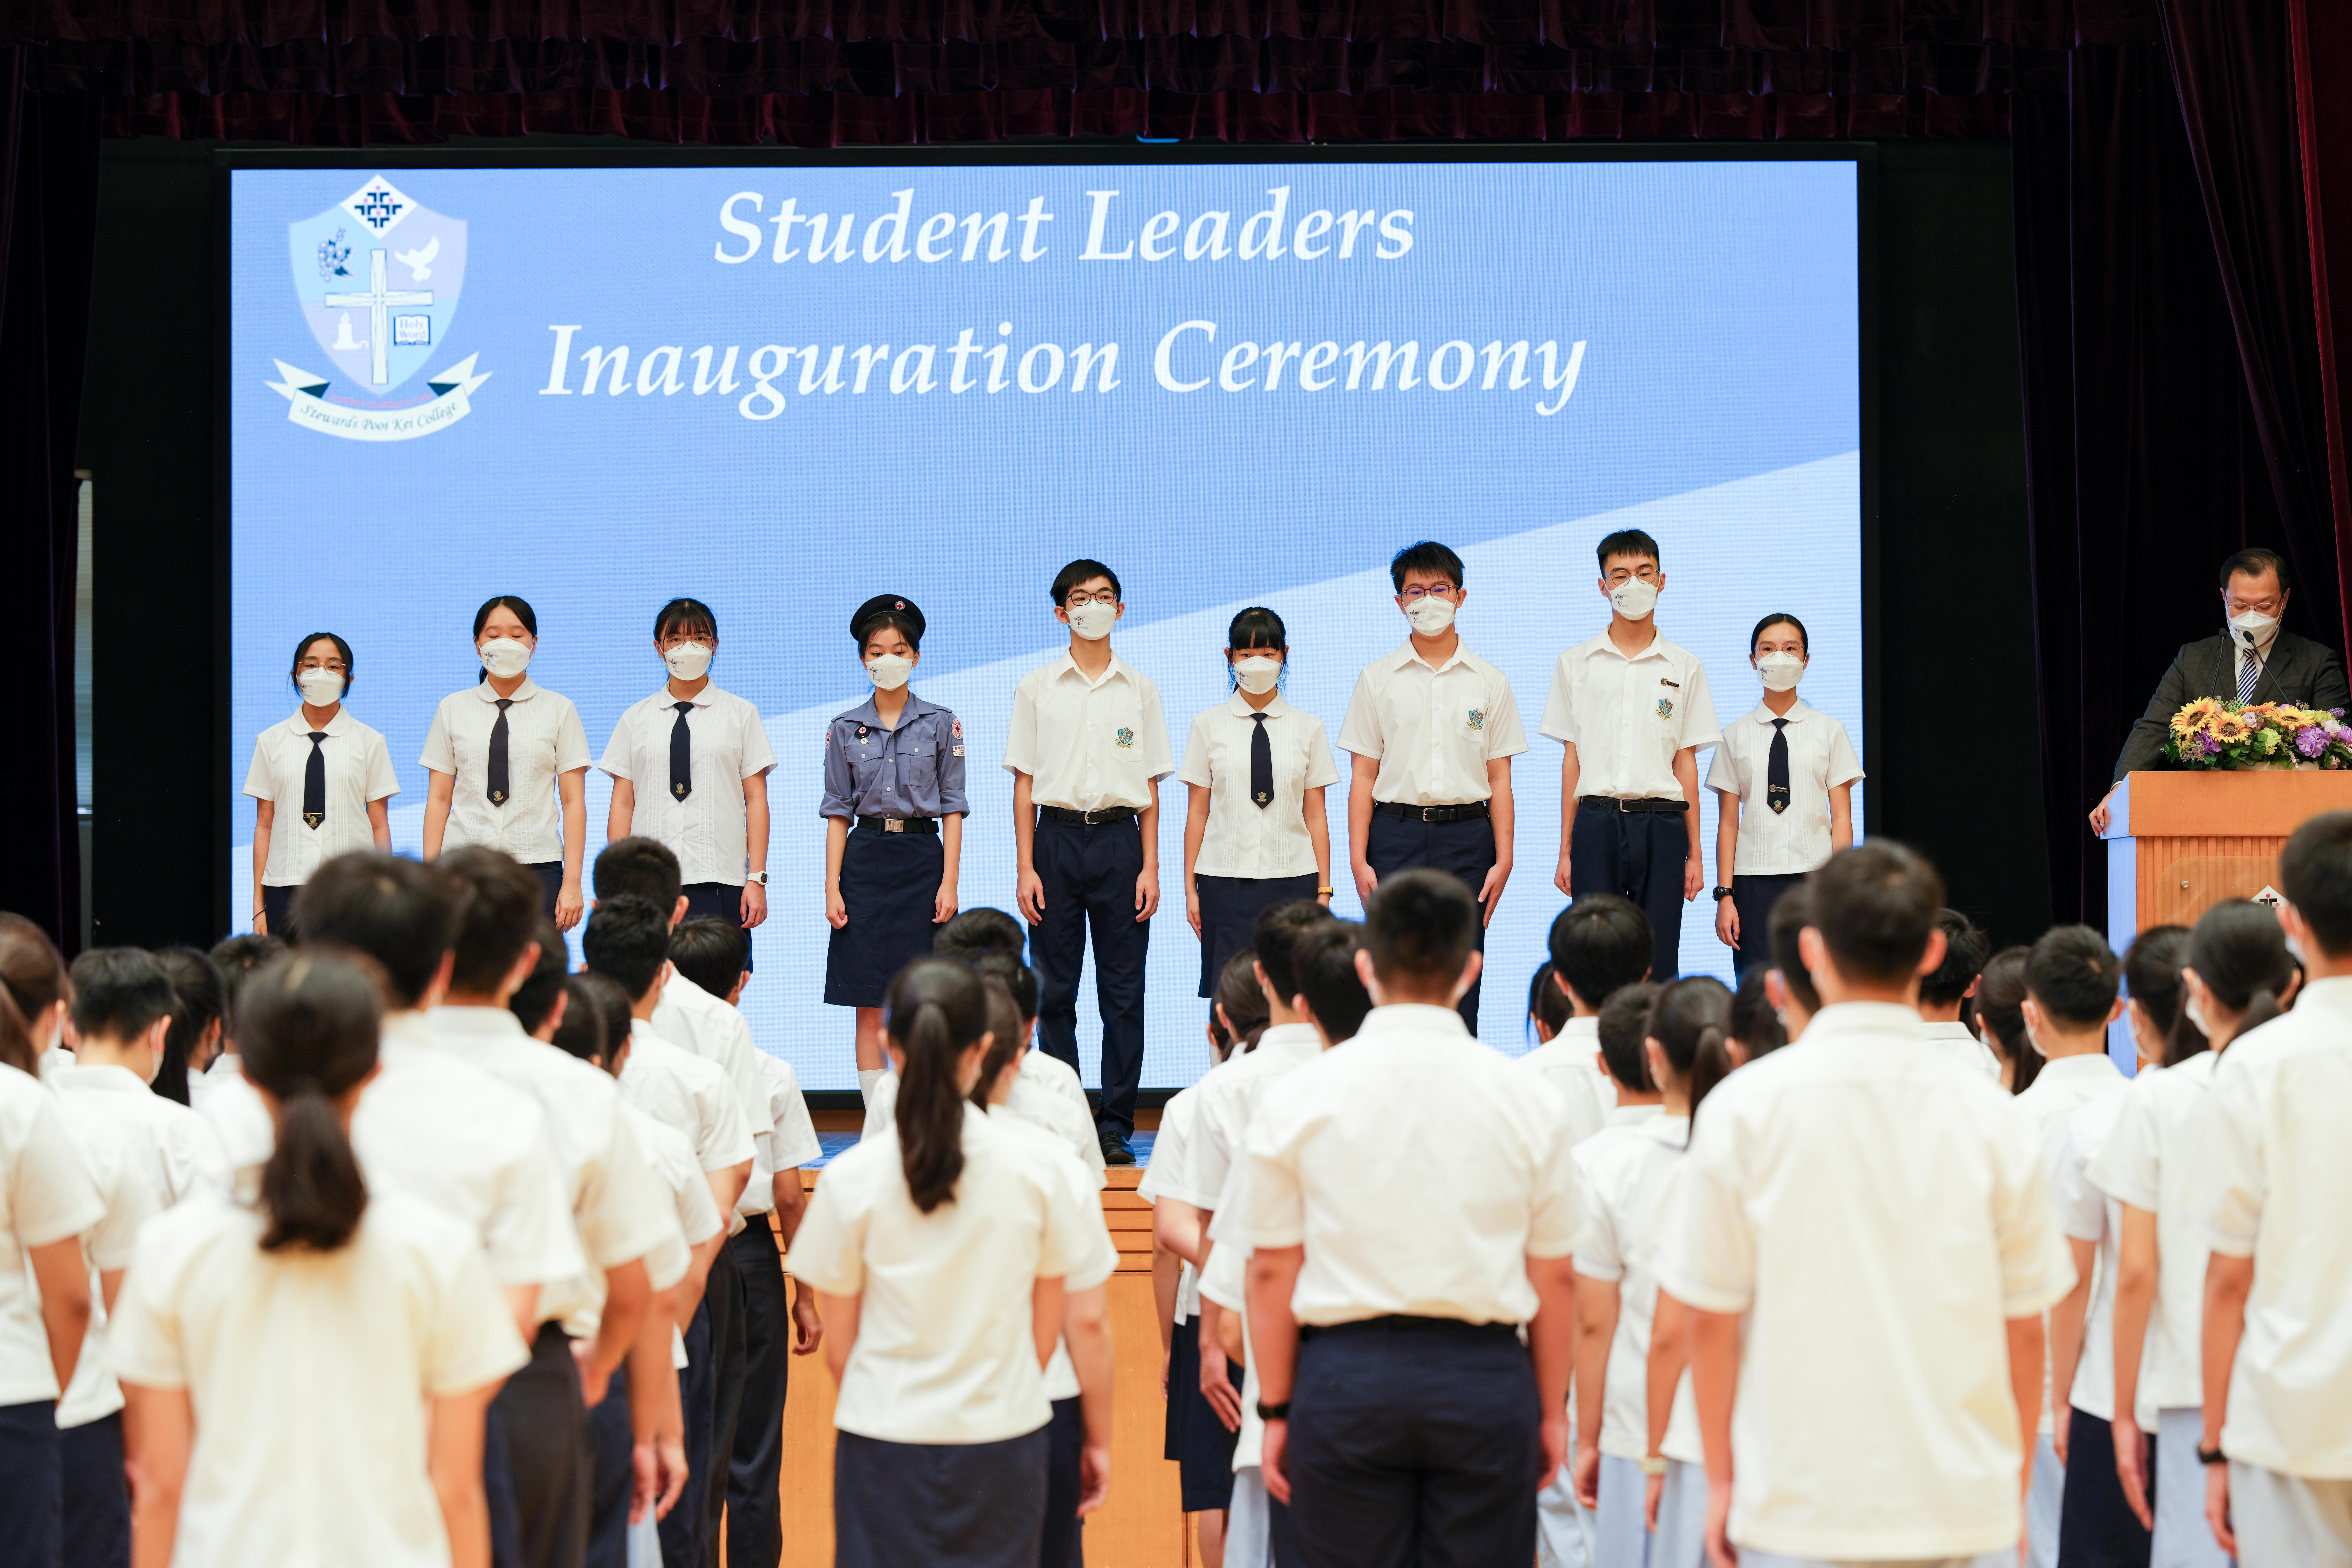 Student Leaders Inauguration Ceremony